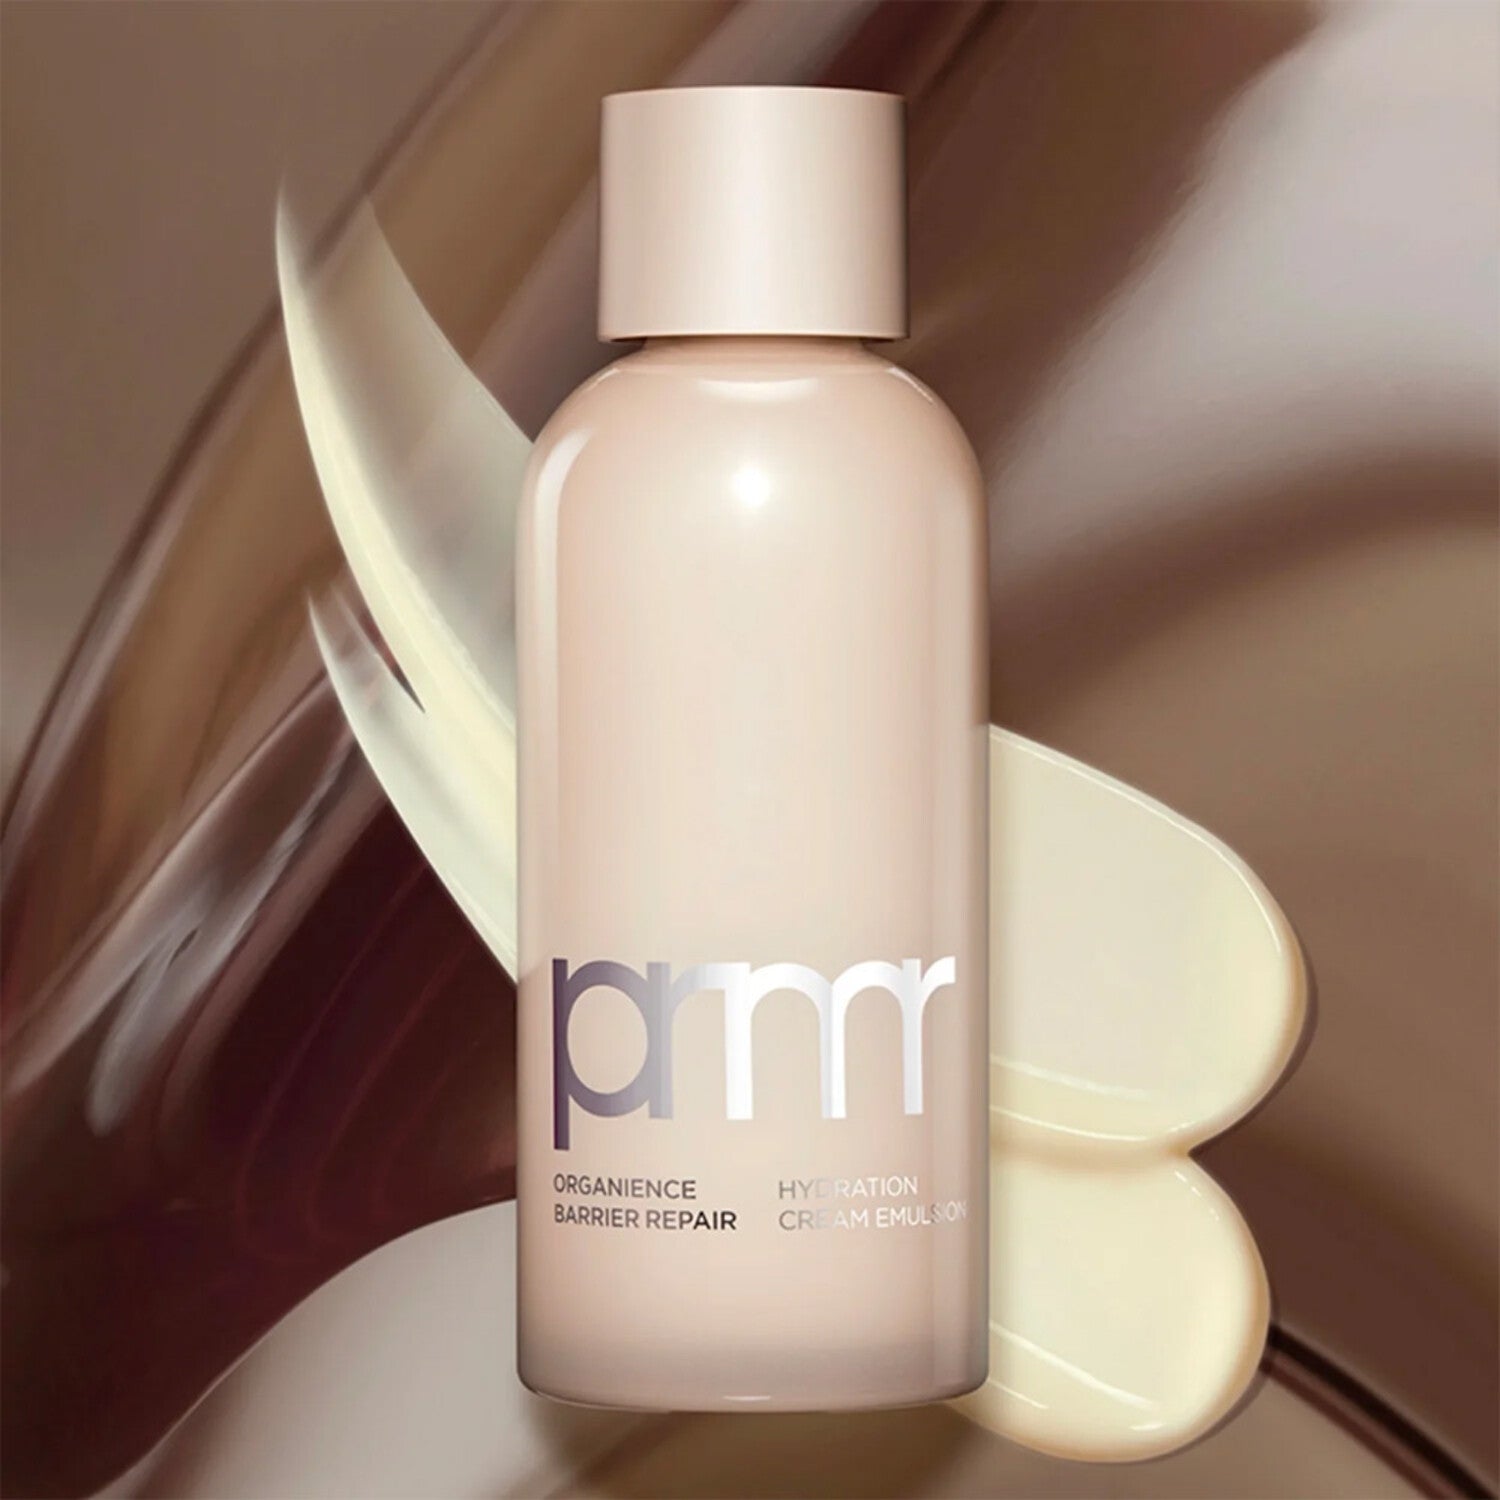 This emulsion is specially crafted to address dryness, sensitivity, and the overall resilience of the skin.